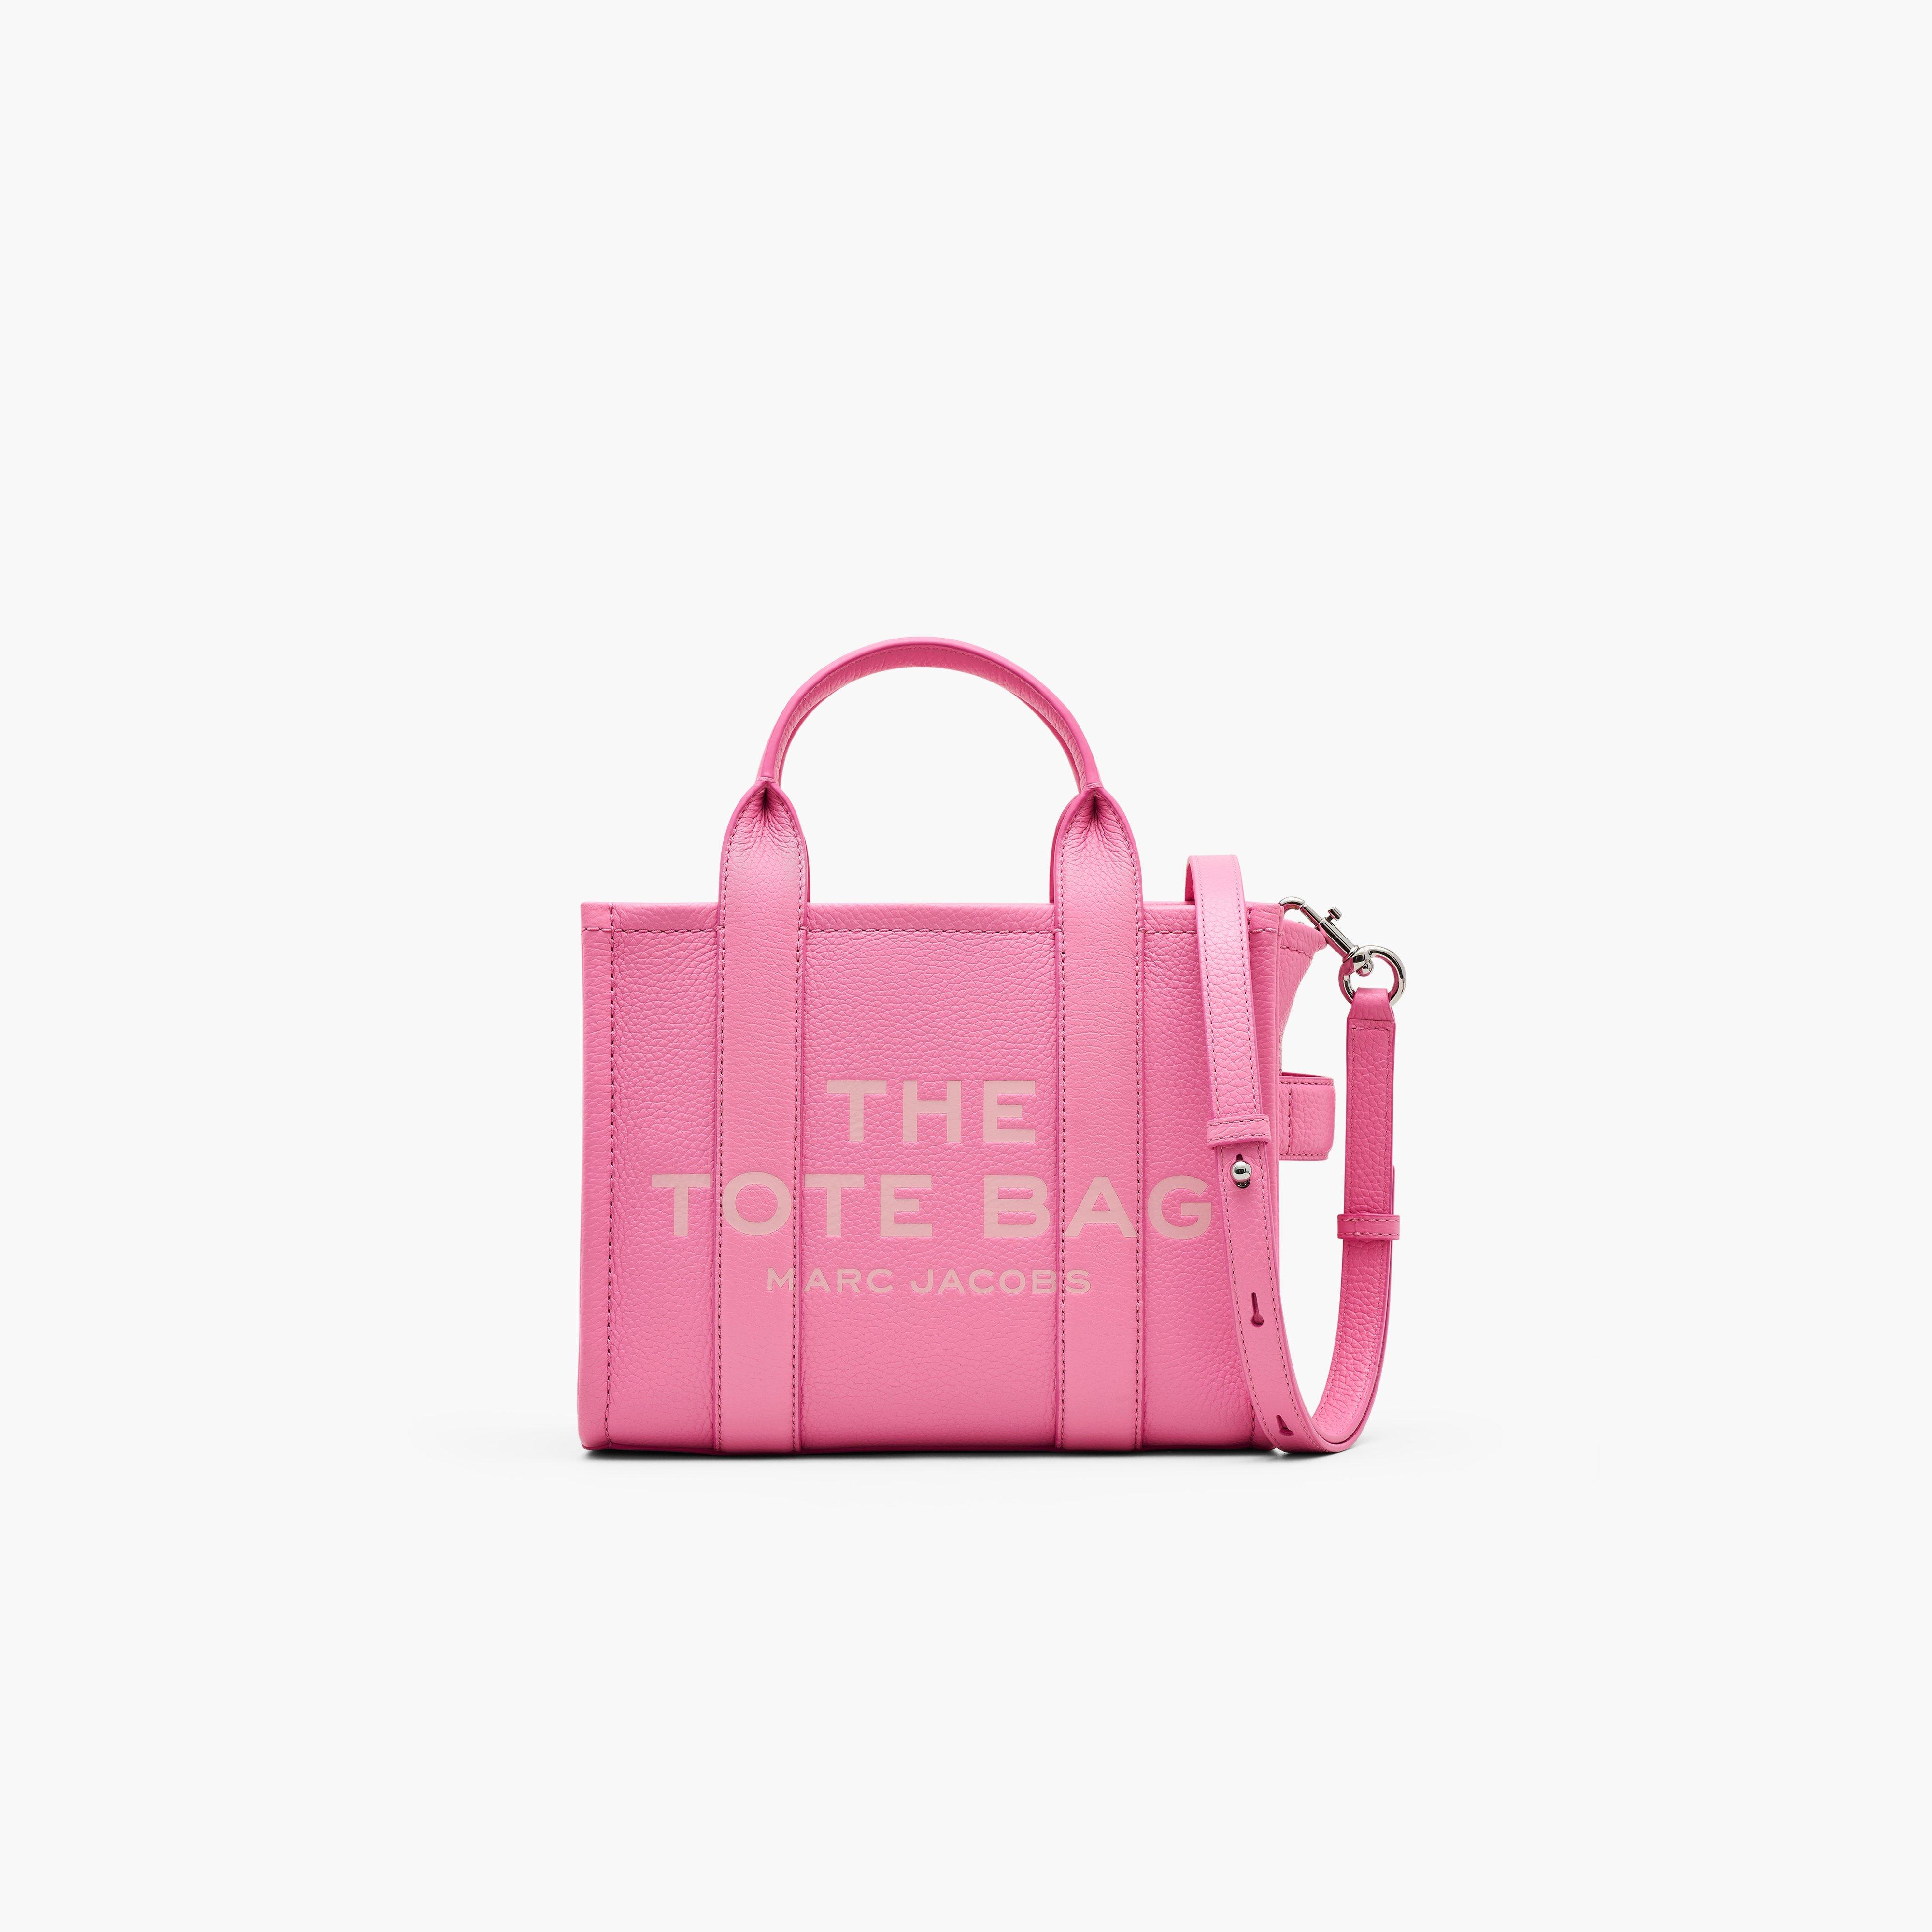 Marc by Marc jacobs The Leather Small Tote Bag,PETAL PINK